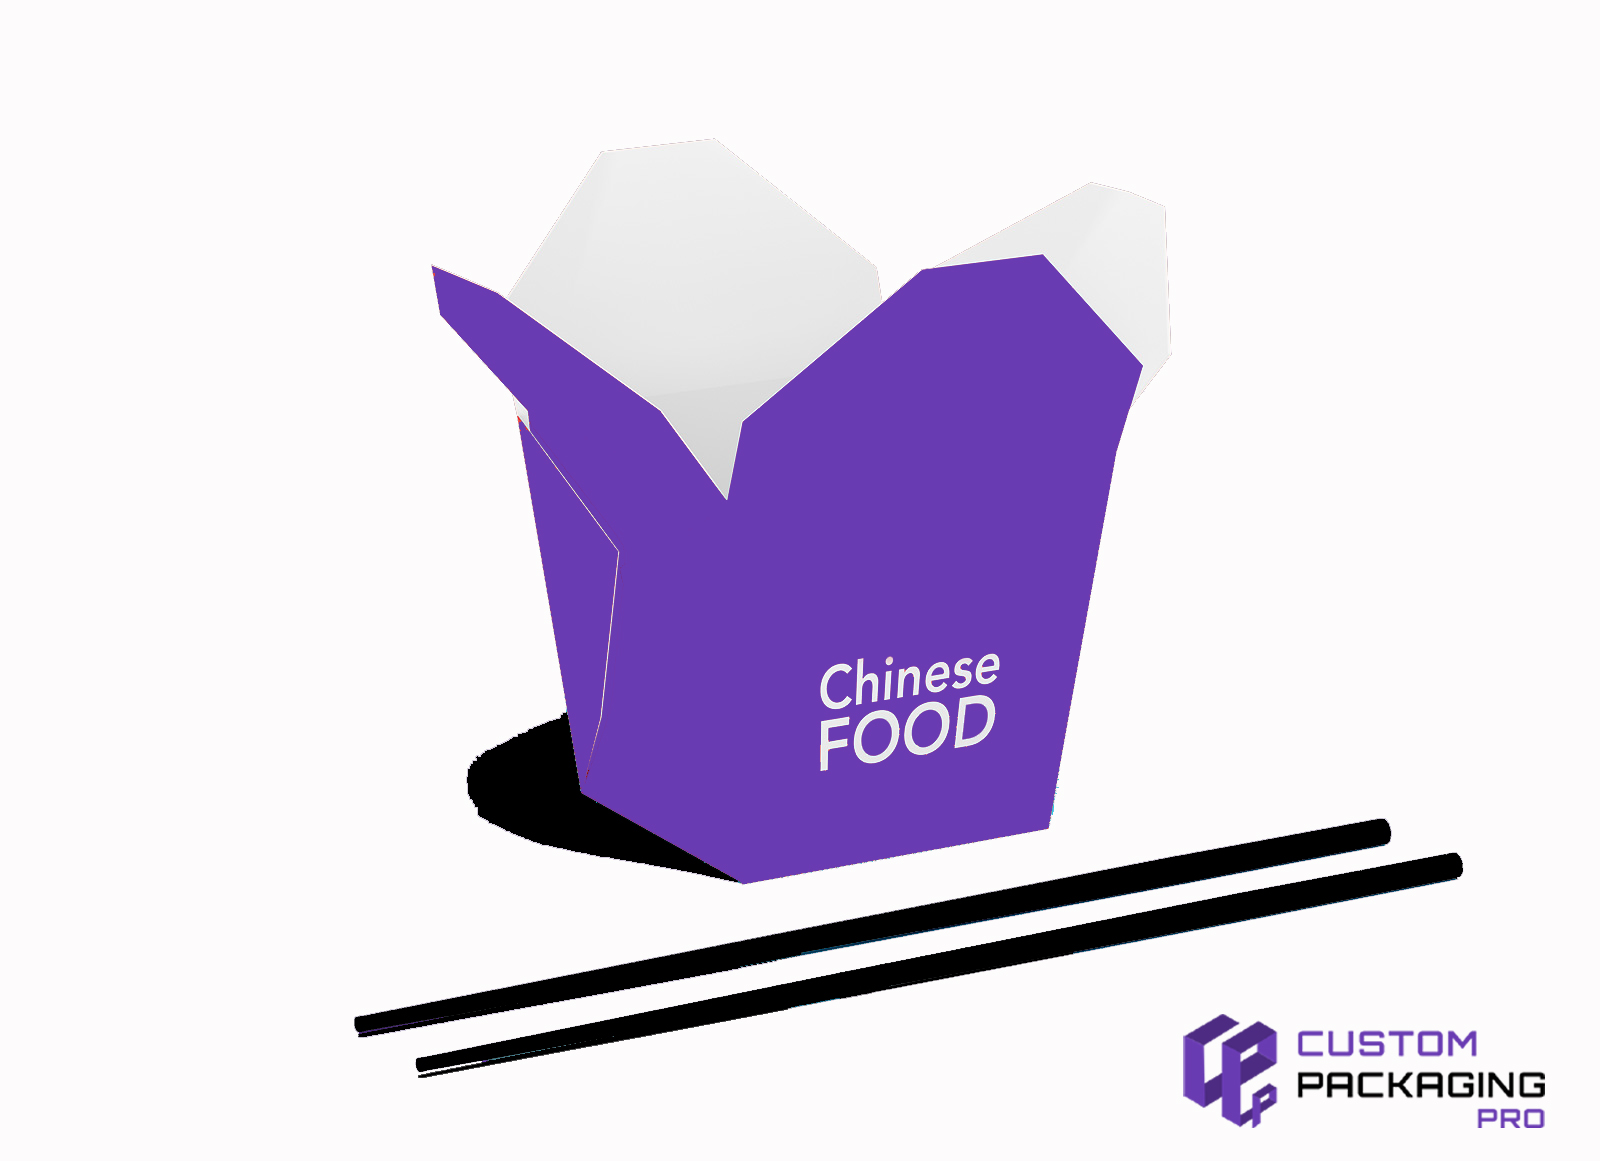 Chinese Food Boxes – A Safer Bet for Your Food Choice